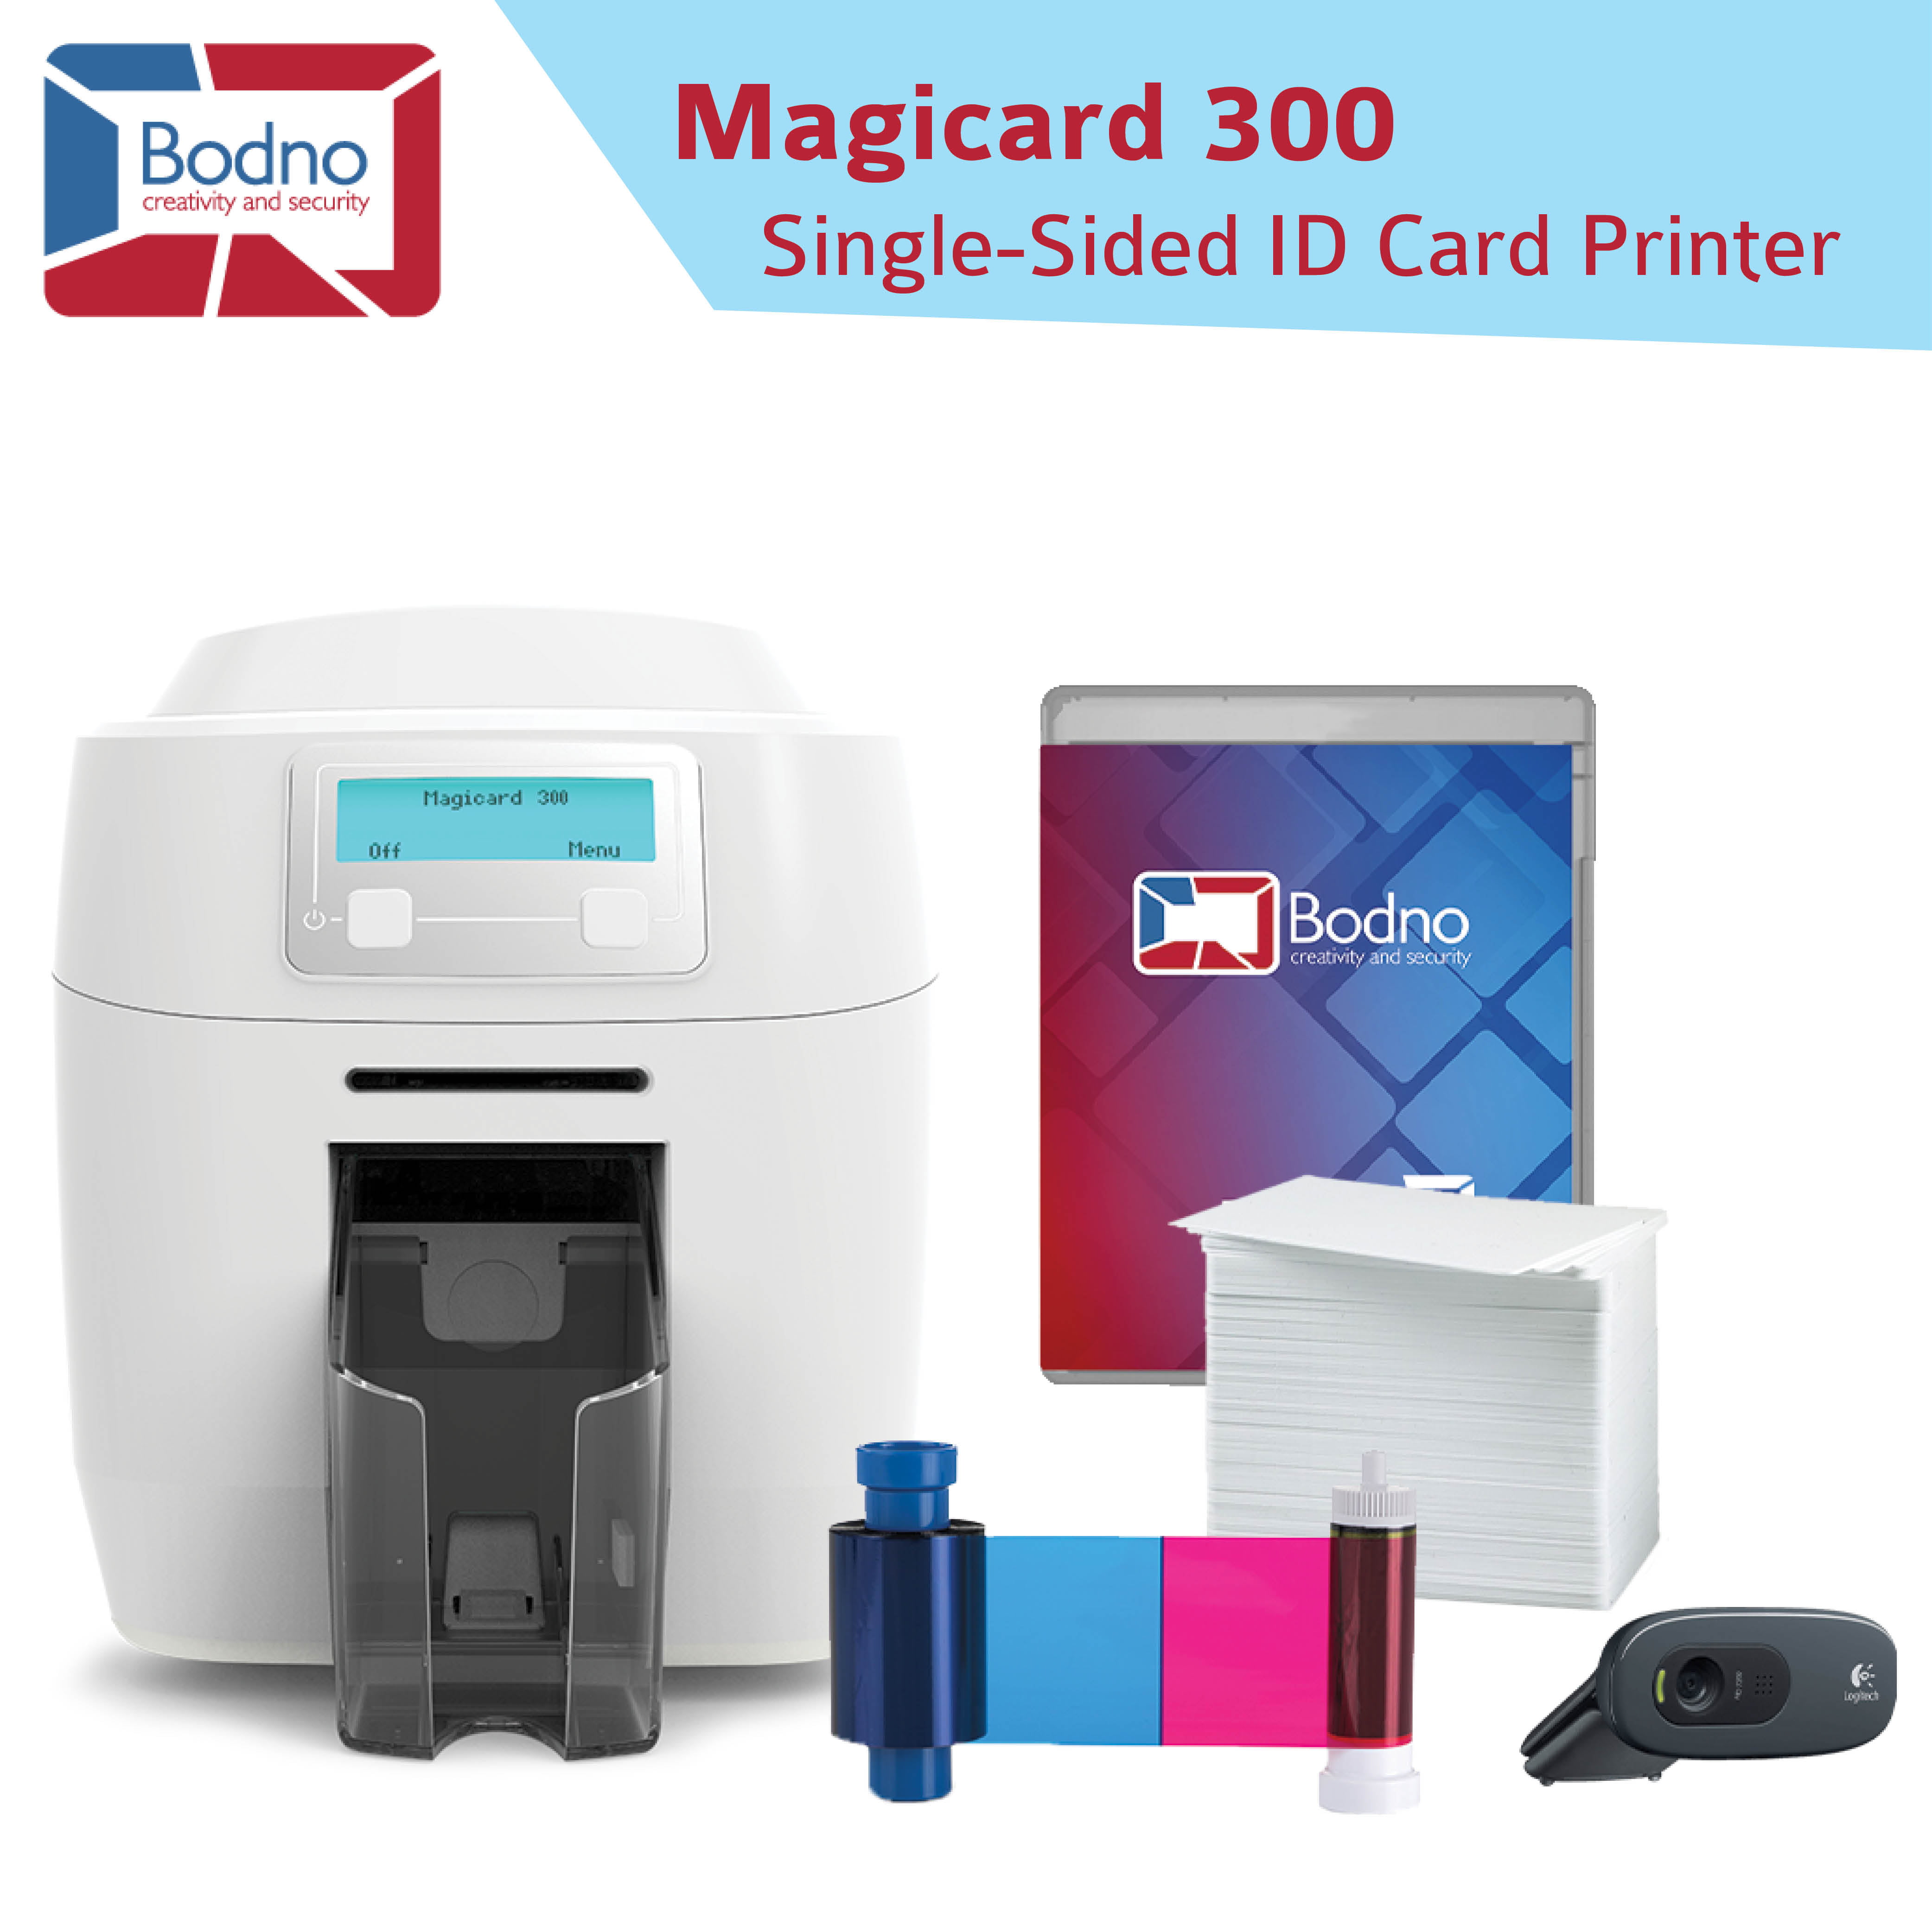 moronic Human igen Magicard 300 ID Card Printer, Single-Sided | Prints Plastic ID Cards and  Badges w/ HoloKote | Complete Package Includes Dye Film Ribbon, PVC Cards,  Bronze Edition Bodno Software, Webcam - Walmart.com